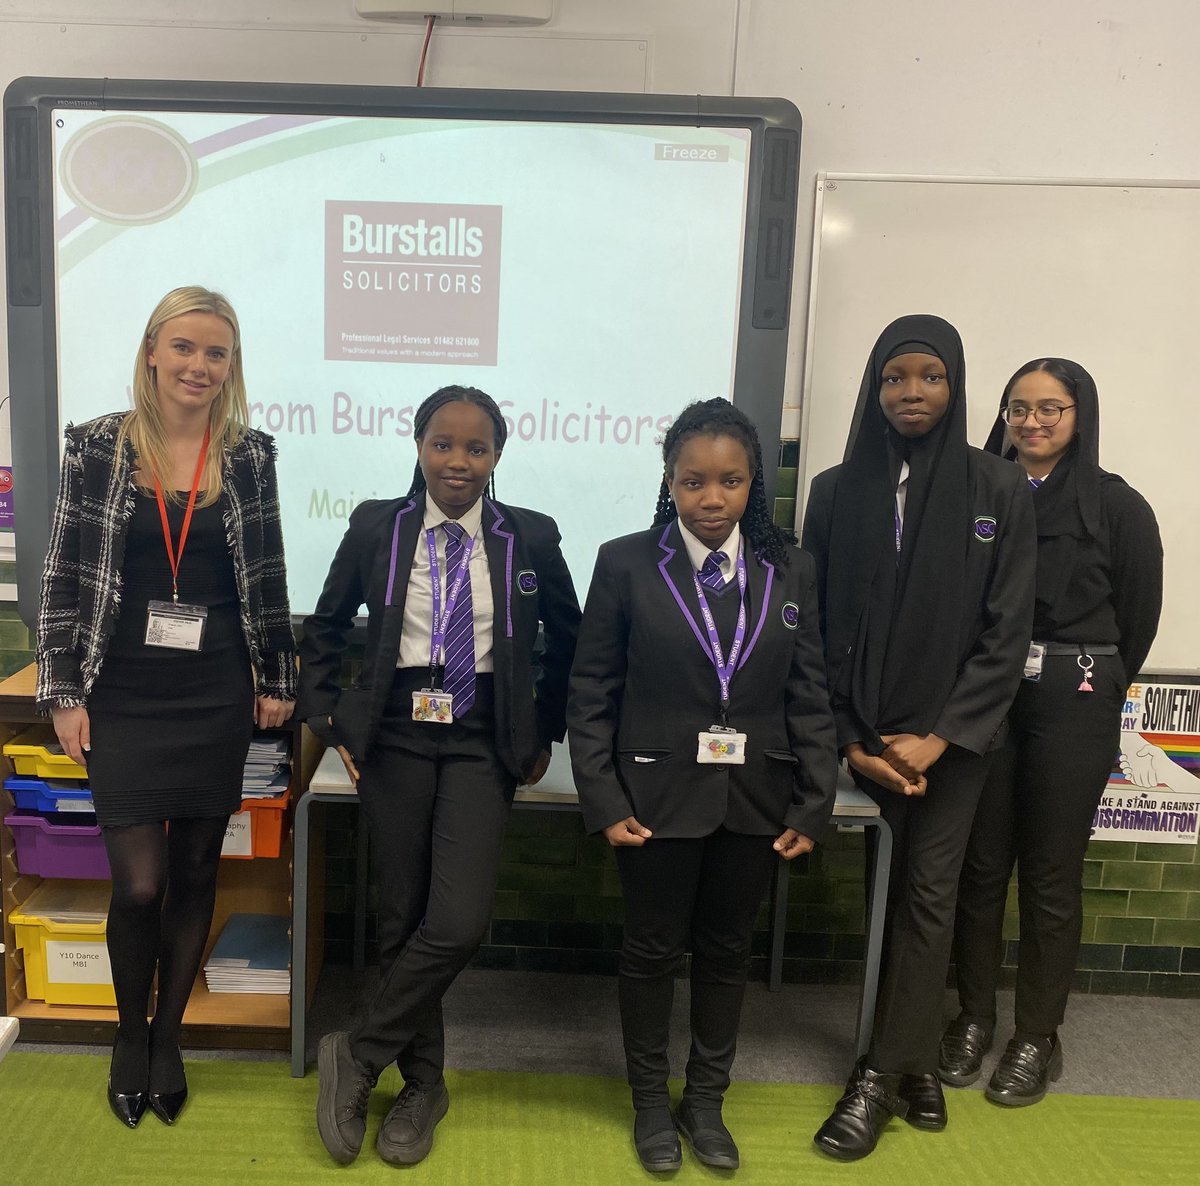 Today the Year 9 GCSE Citizenship class welcomed solicitor Maisie Collier into their lesson. Maisie delivered a session on the roles of legal representatives. A huge thank you to @BurstallsLaw